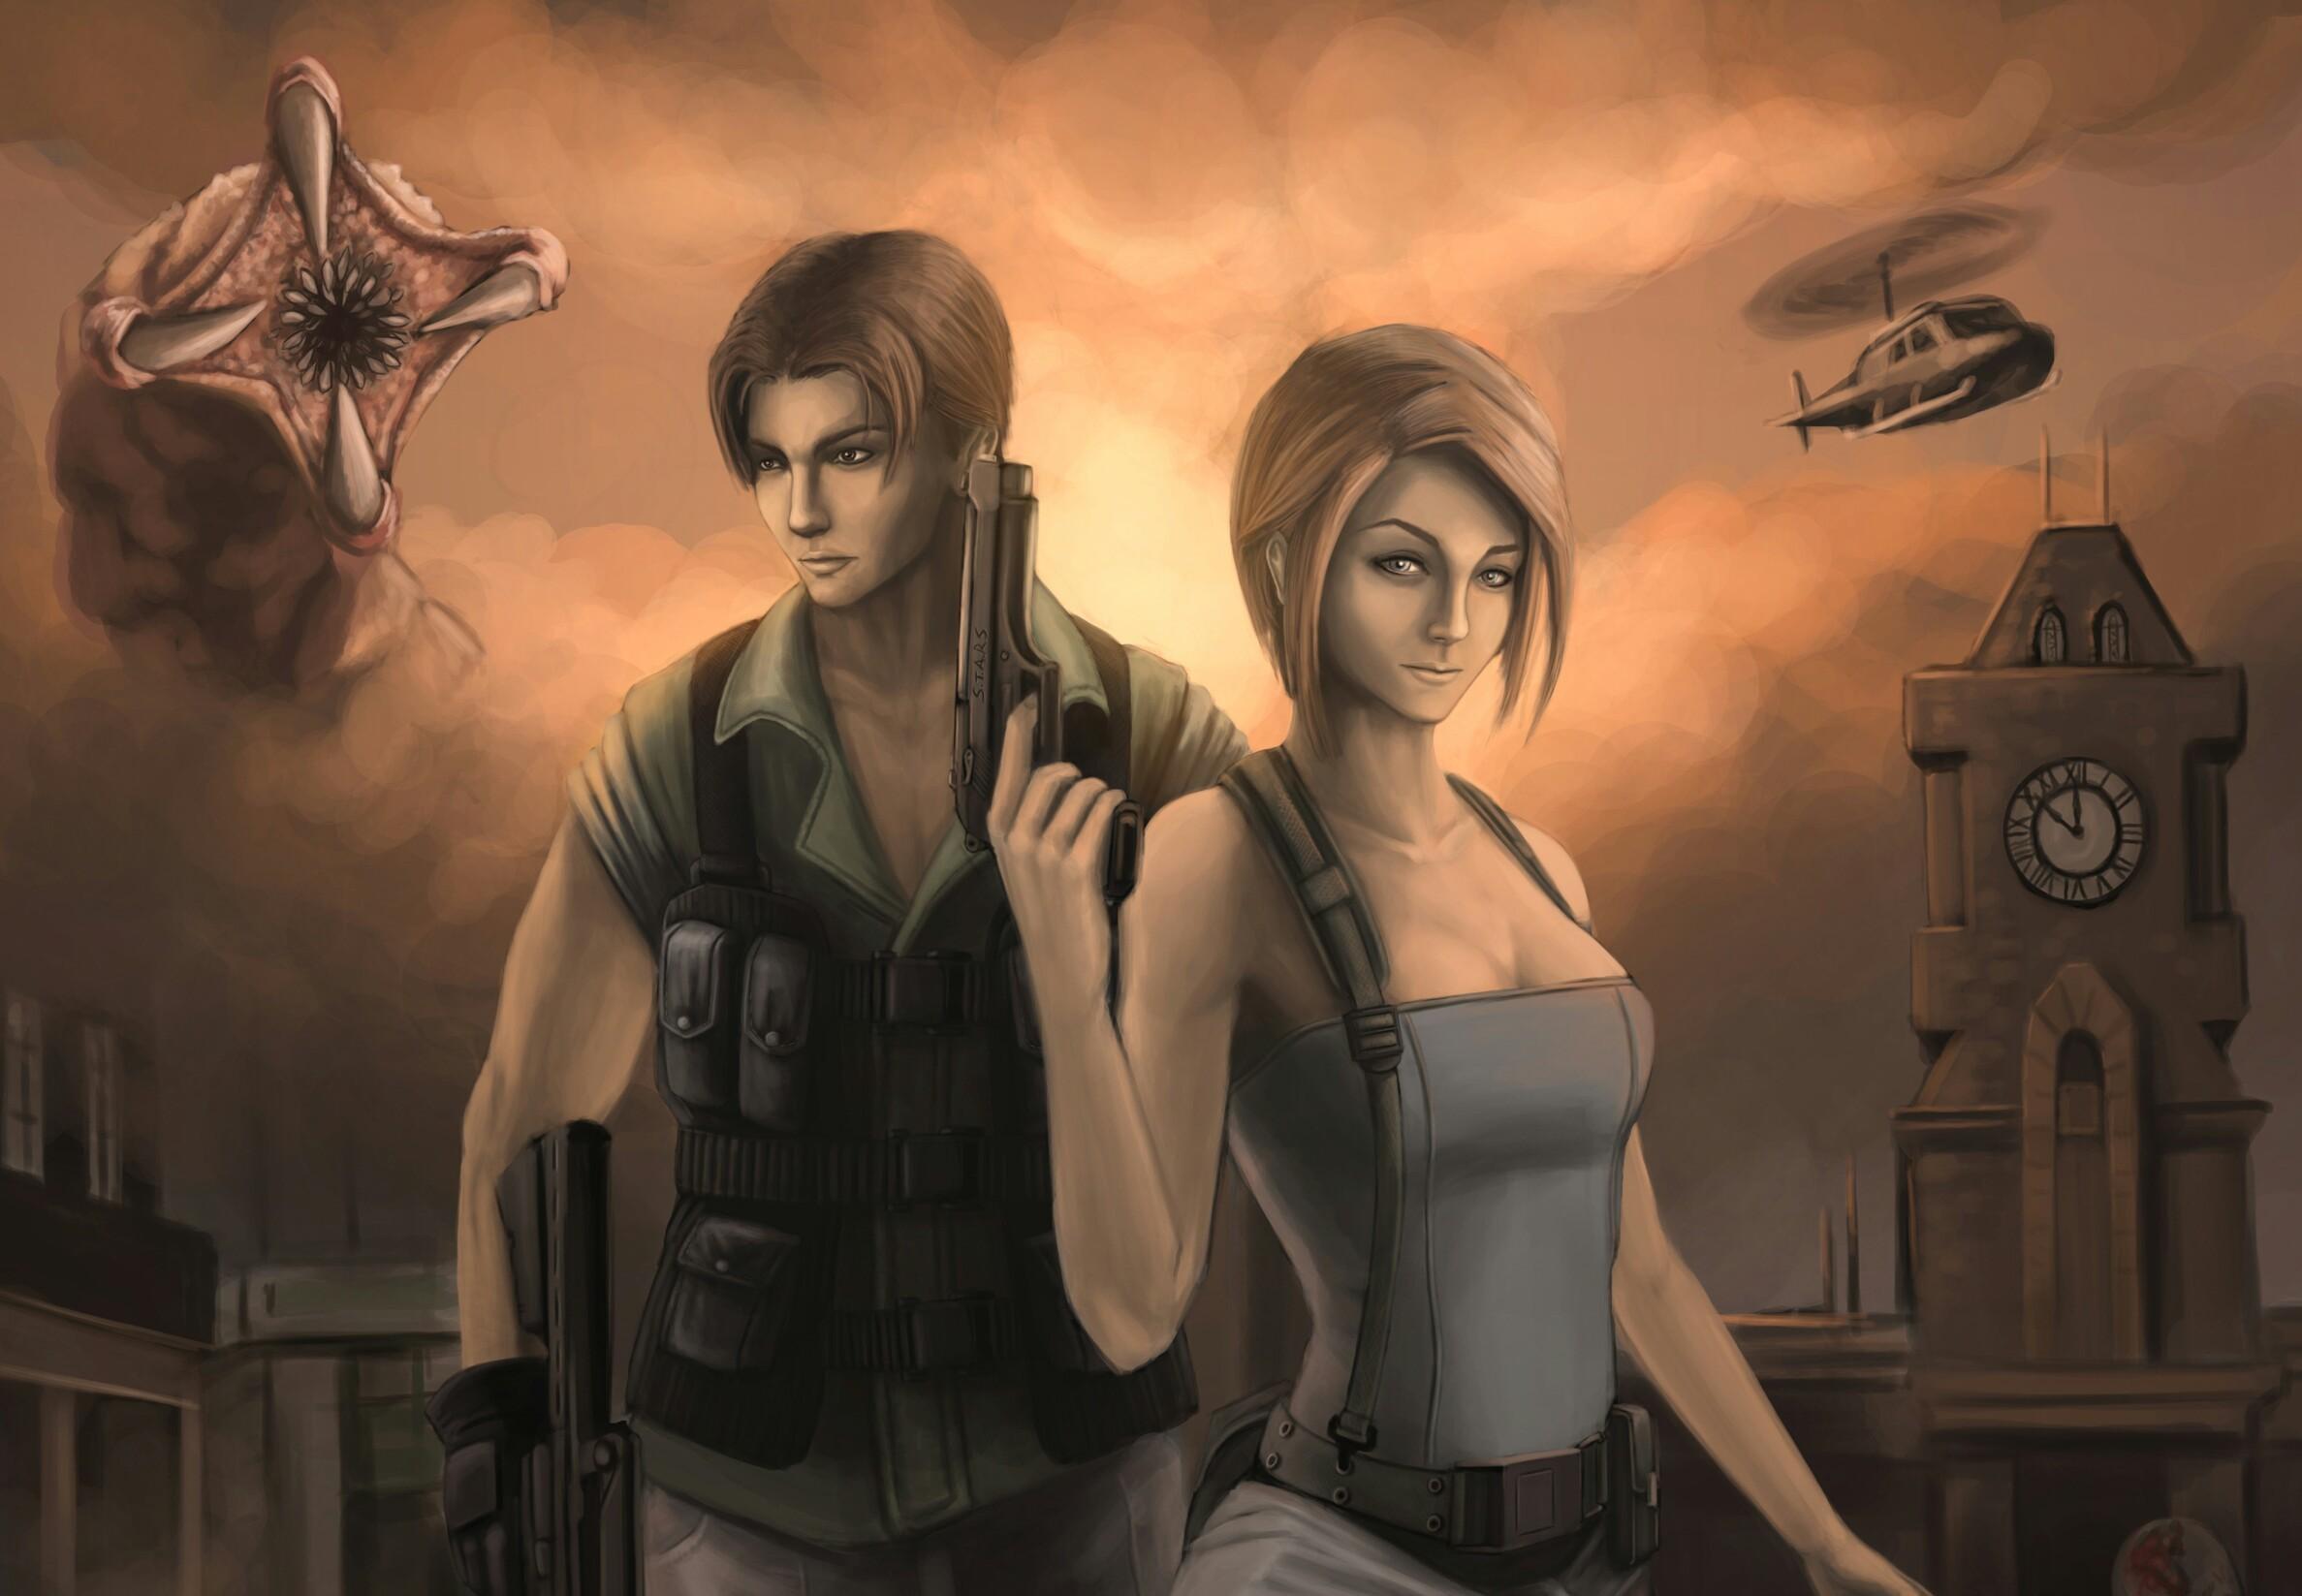 Carlos Oliveira Resident Evil 3 Wallpapers Wallpaper Cave 3278